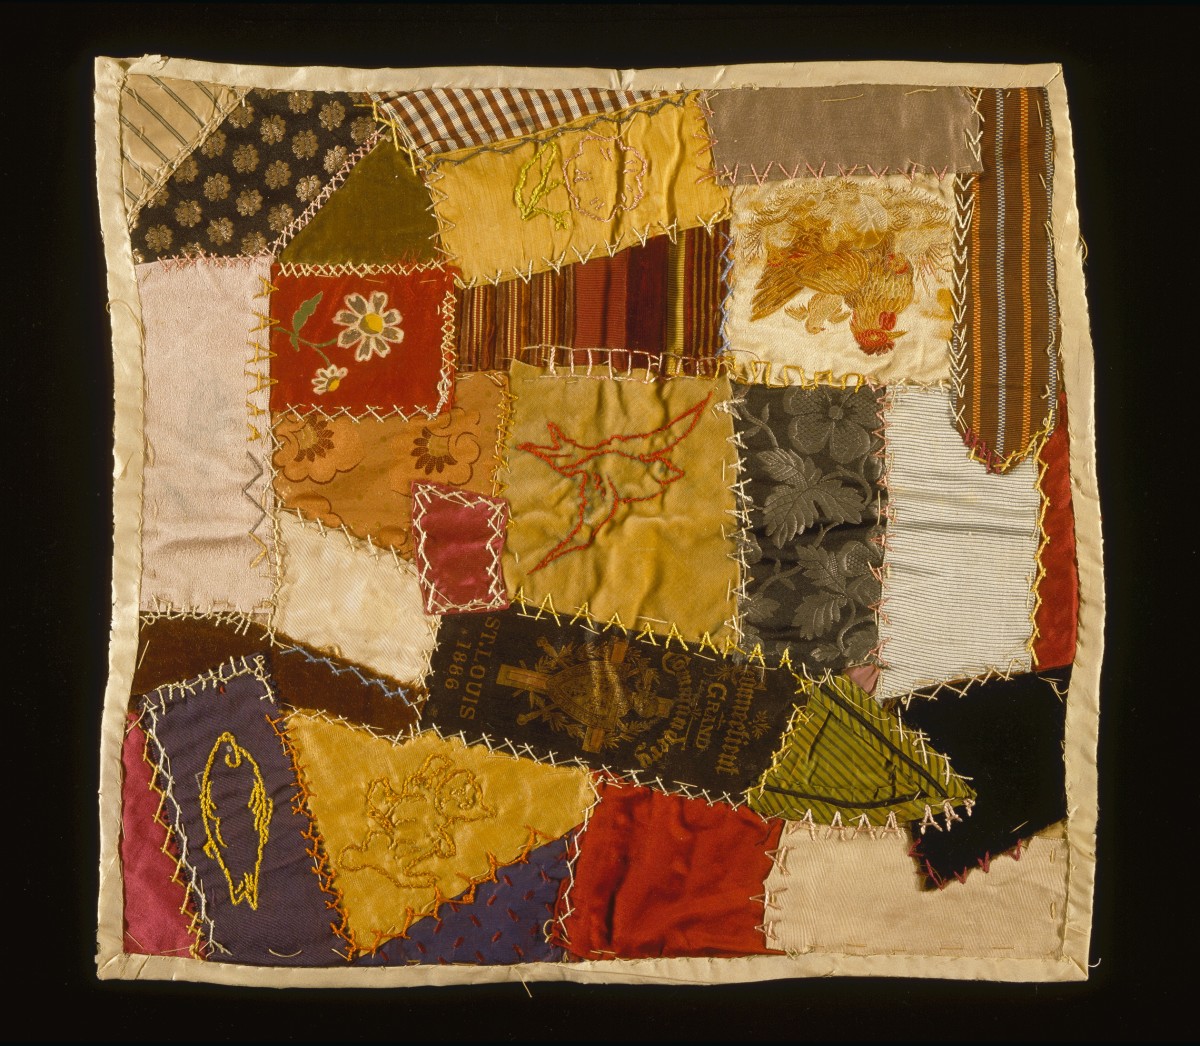 An example of a Crazy quilt.